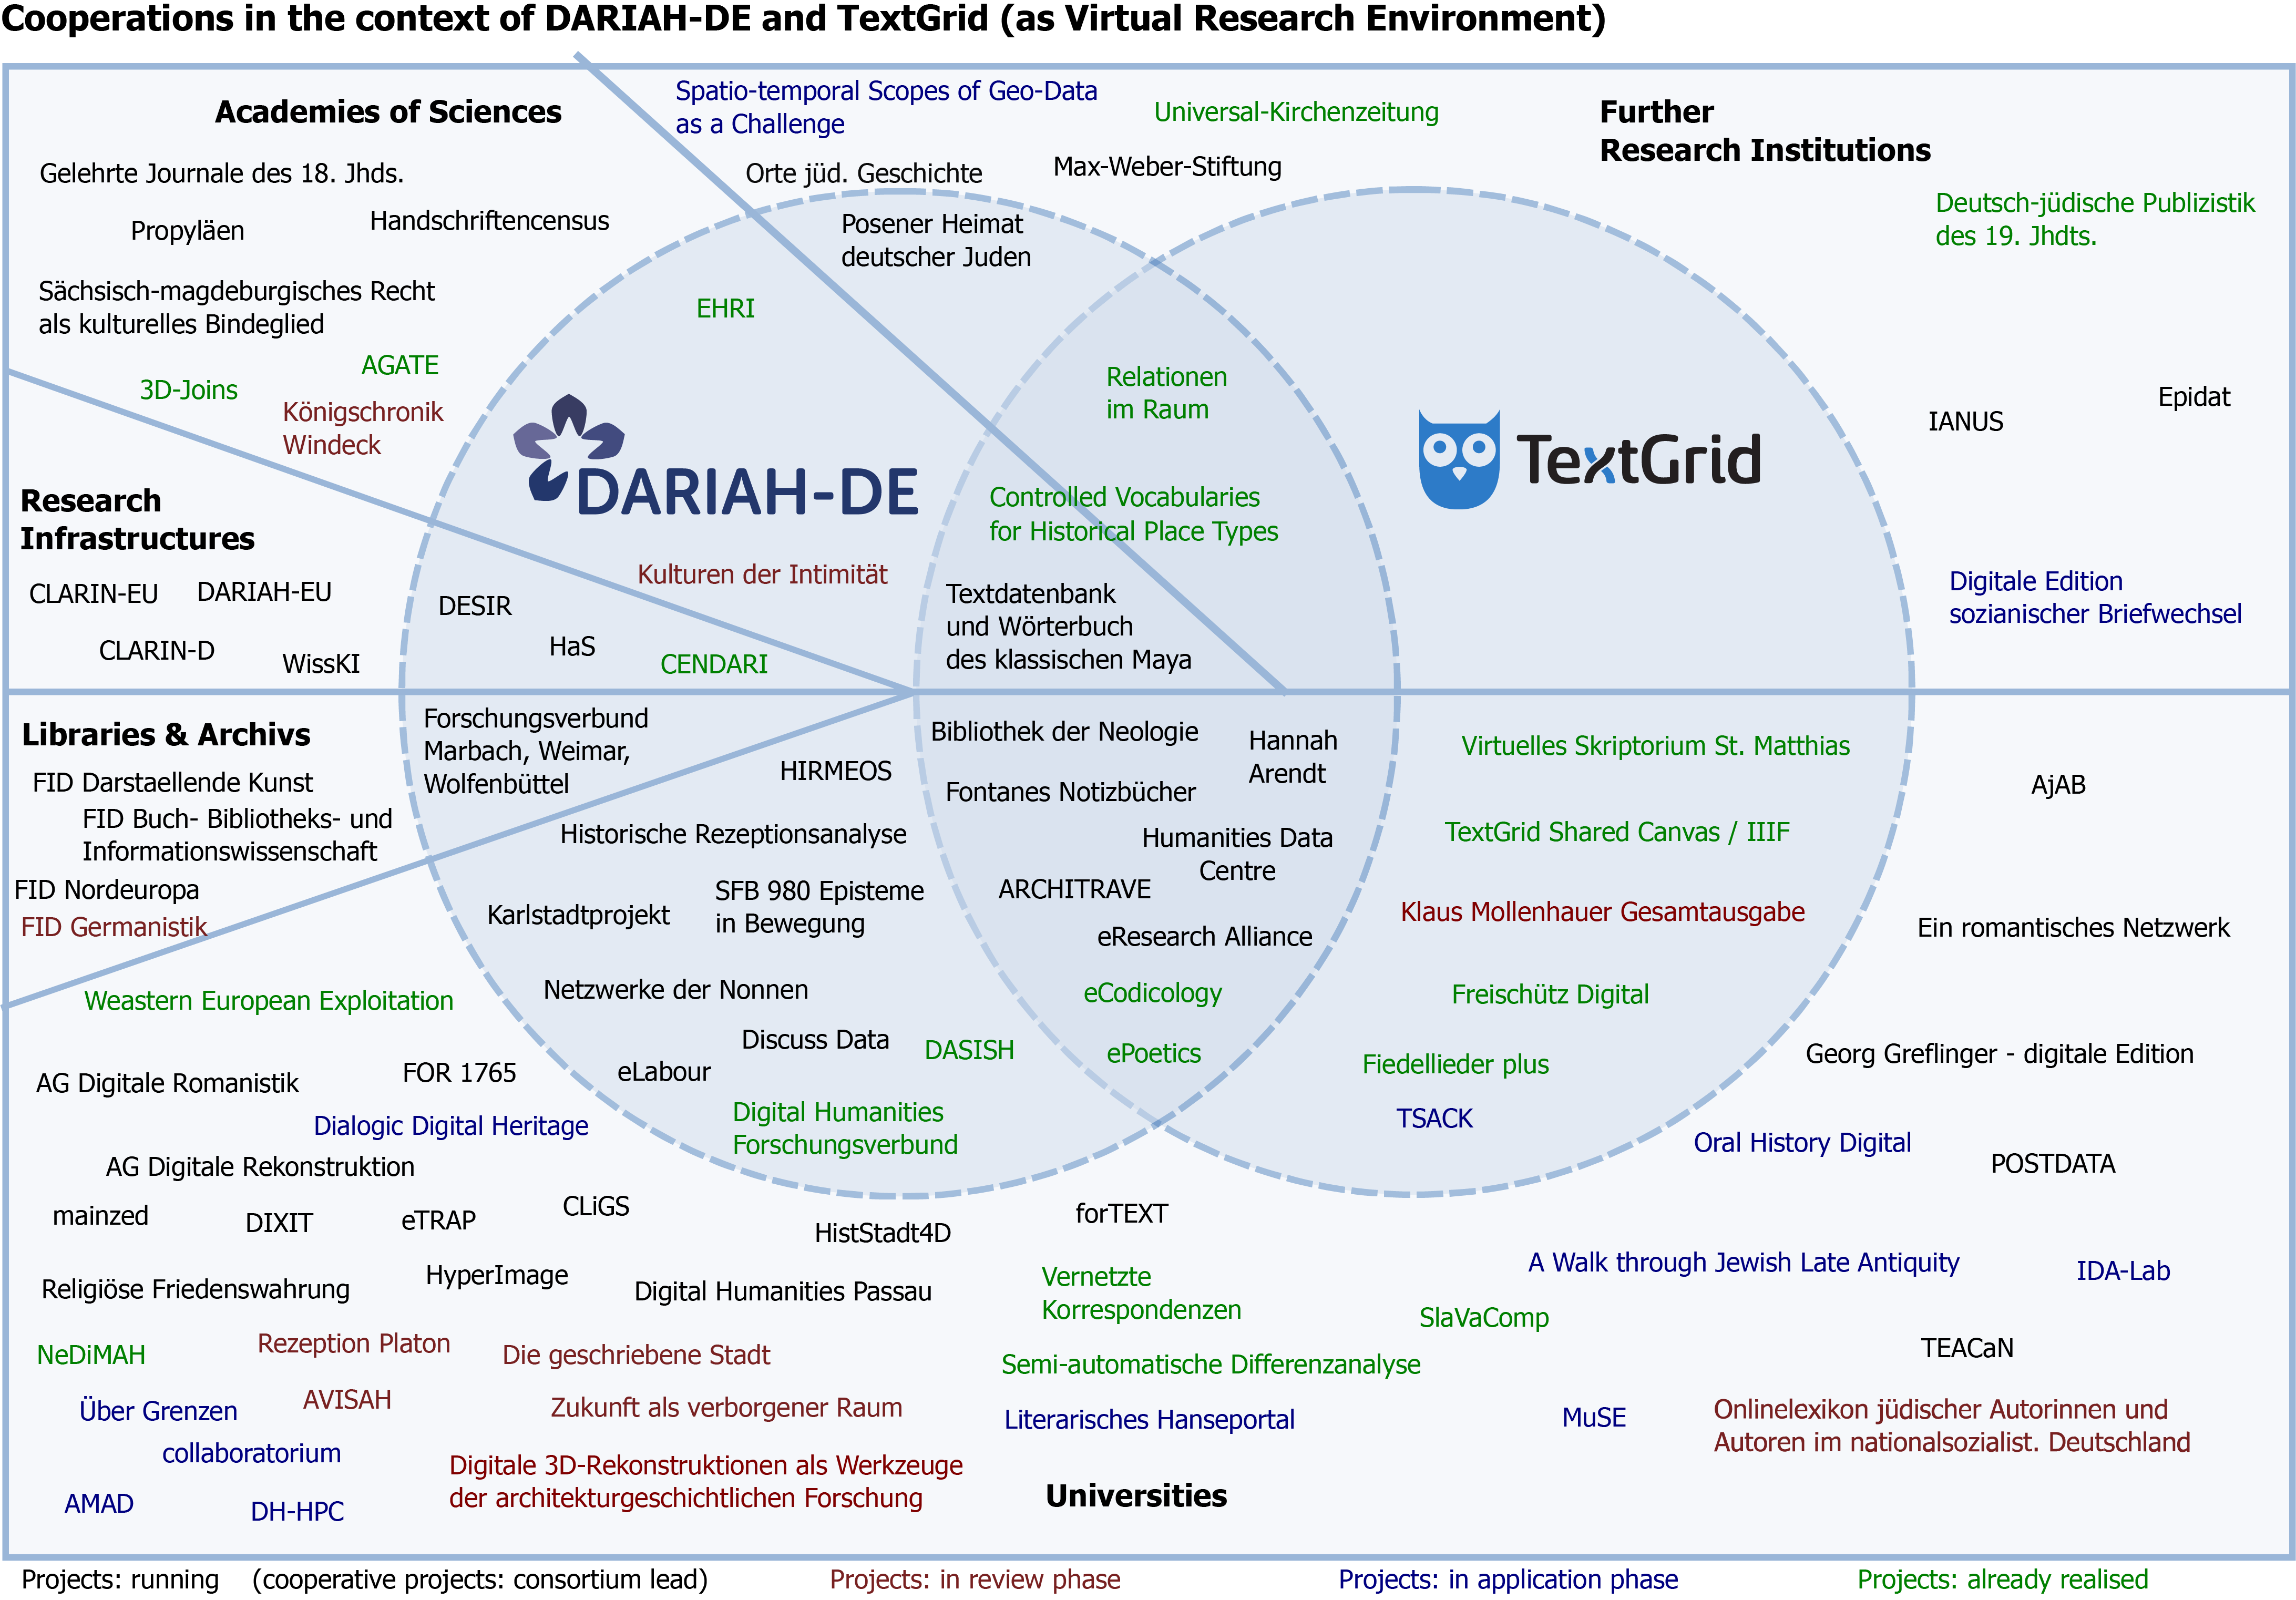 Fig. 1: Cooperations in the context of DARIAH-DE and TextGrid (as Virtual Research Environment)